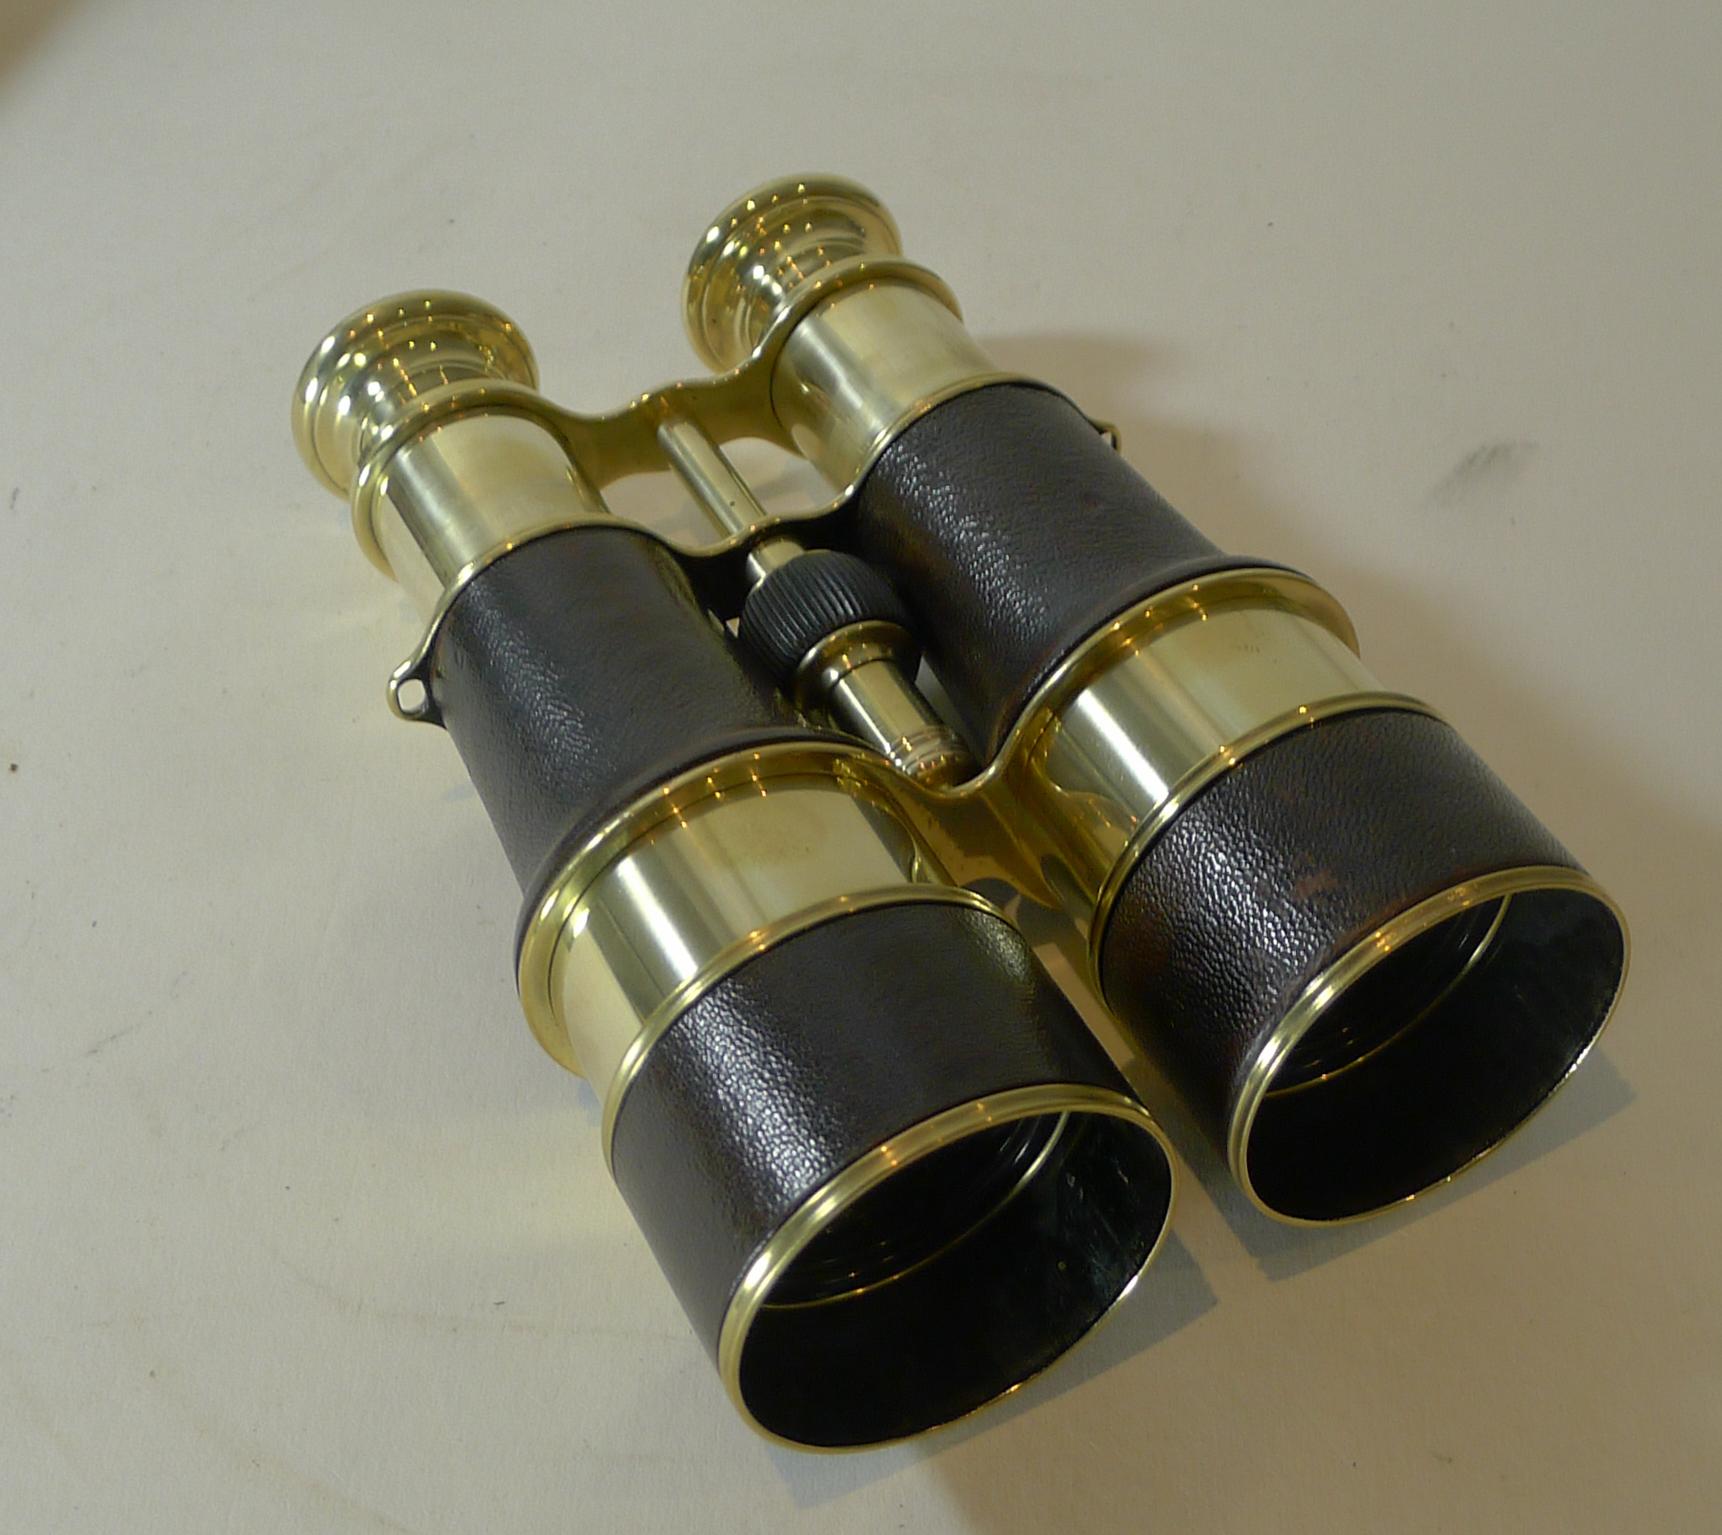 French Pair WW1 Binoculars, British Officer's Issue by LeMaire, Paris